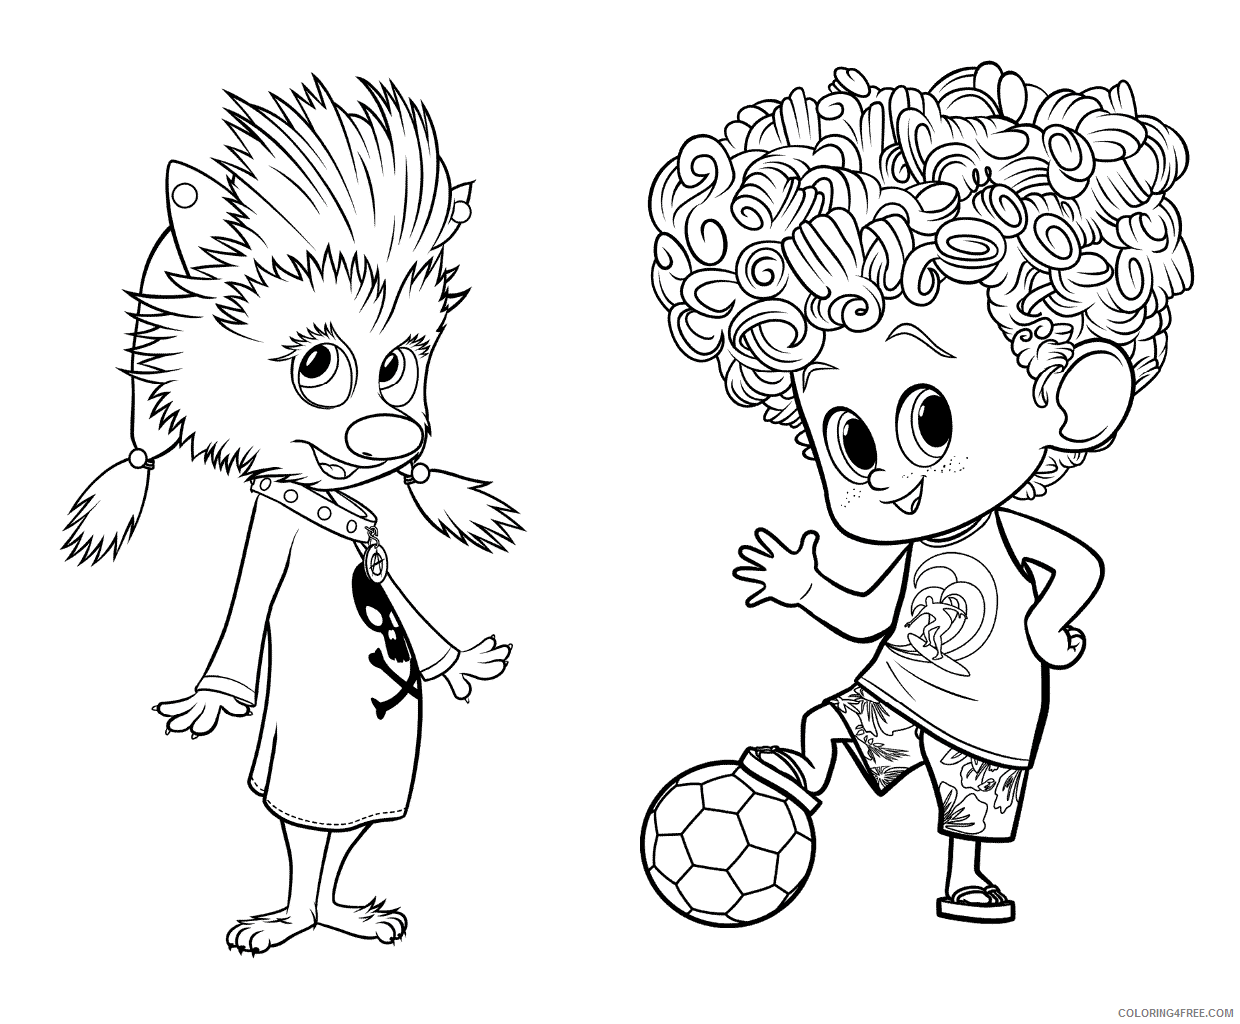 Hotel Transylvania Coloring Pages TV Film Winnie and Dennis 2020 03833 Coloring4free